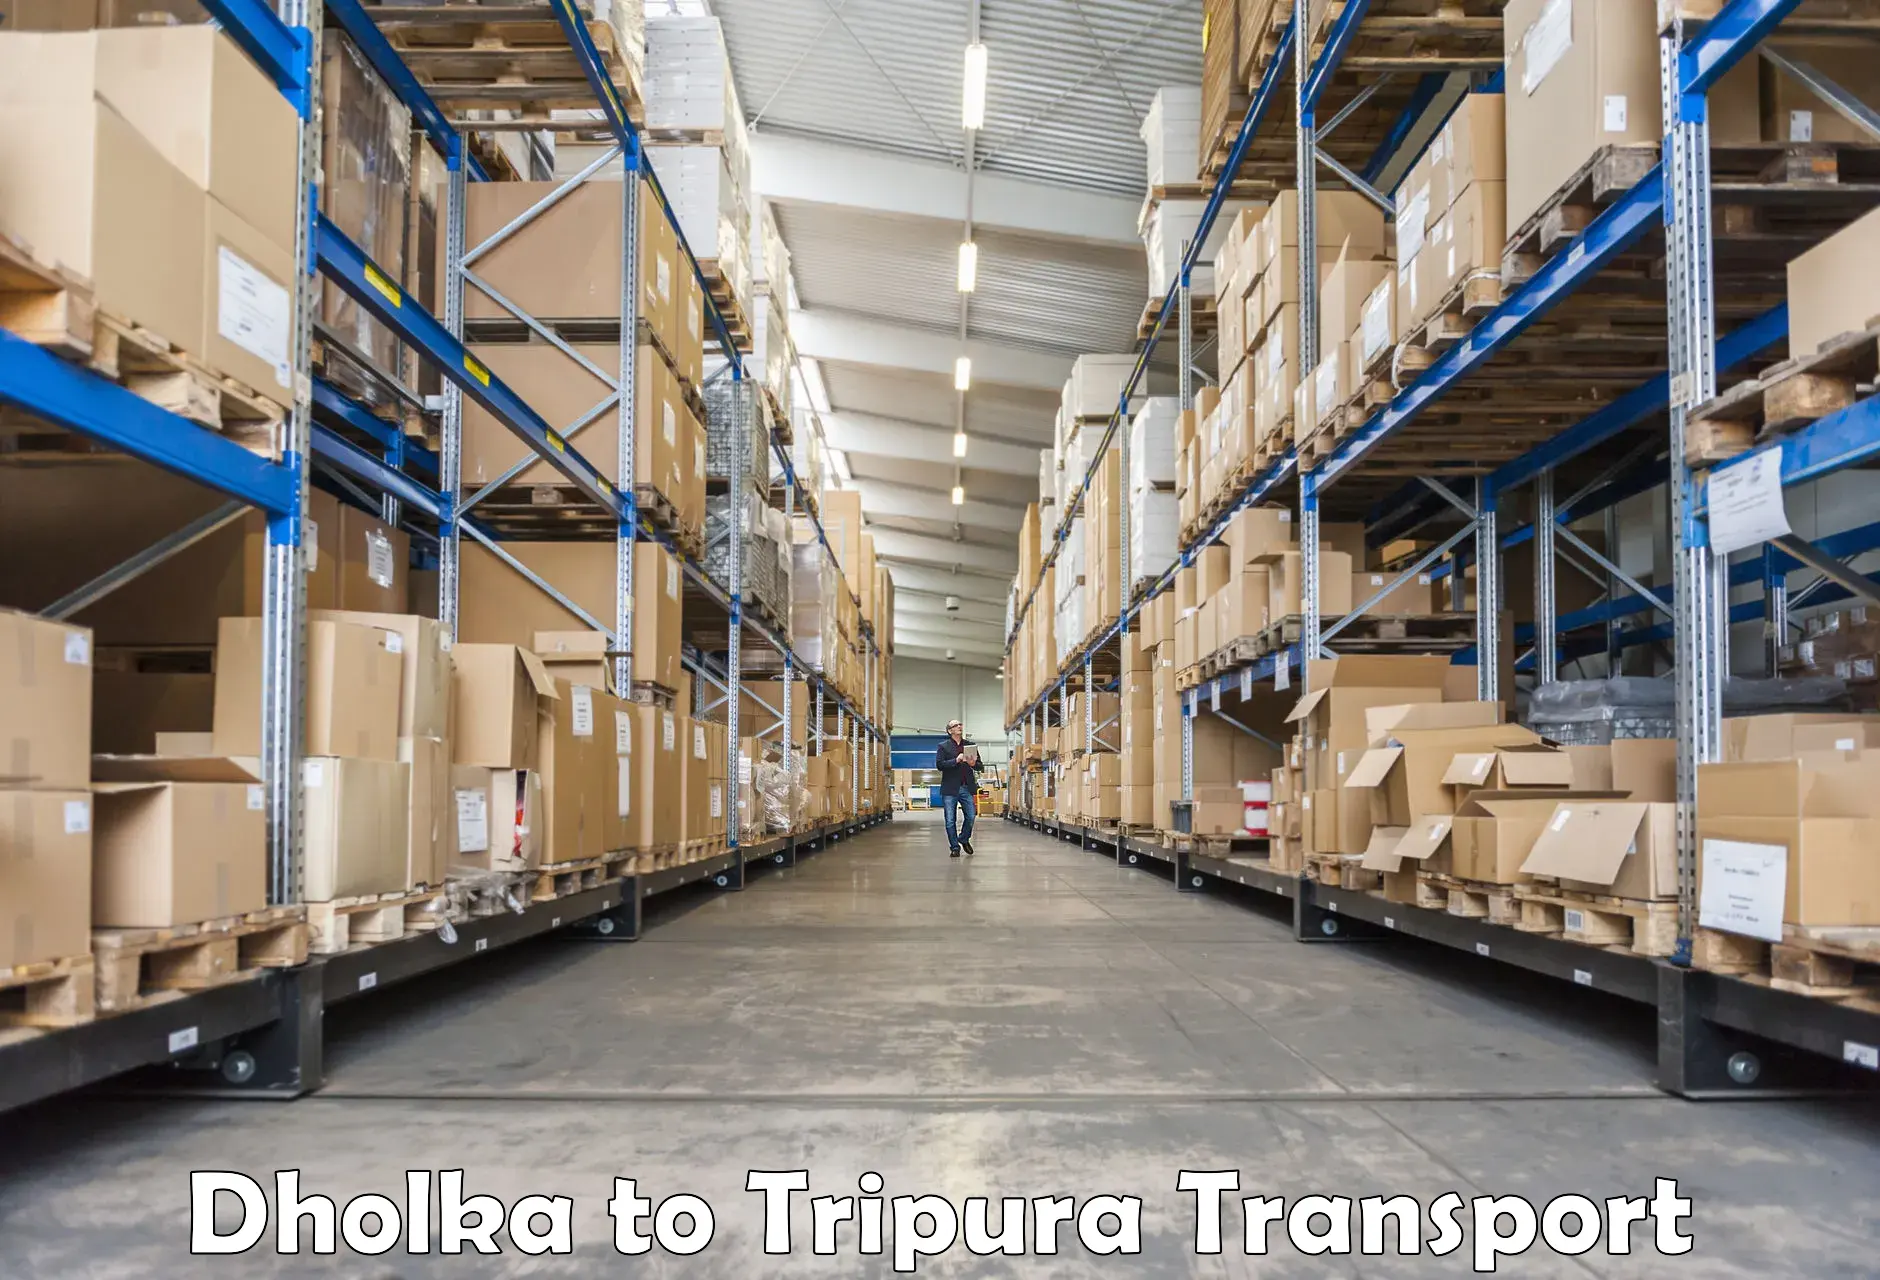 Truck transport companies in India Dholka to Tripura